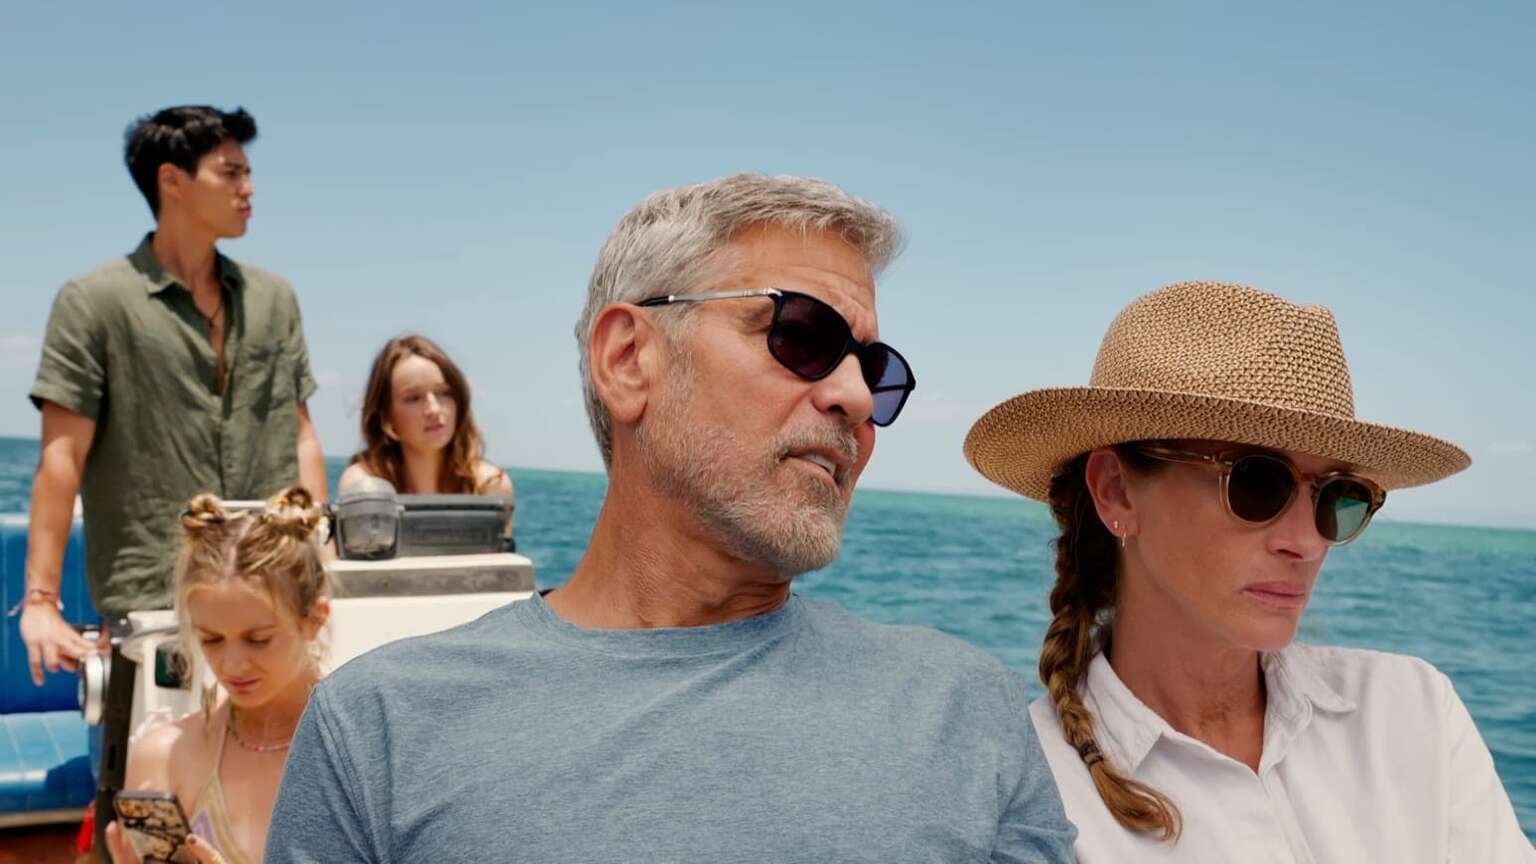 When Will Clooney and Julia Roberts’ Film ‘Ticket to Paradise